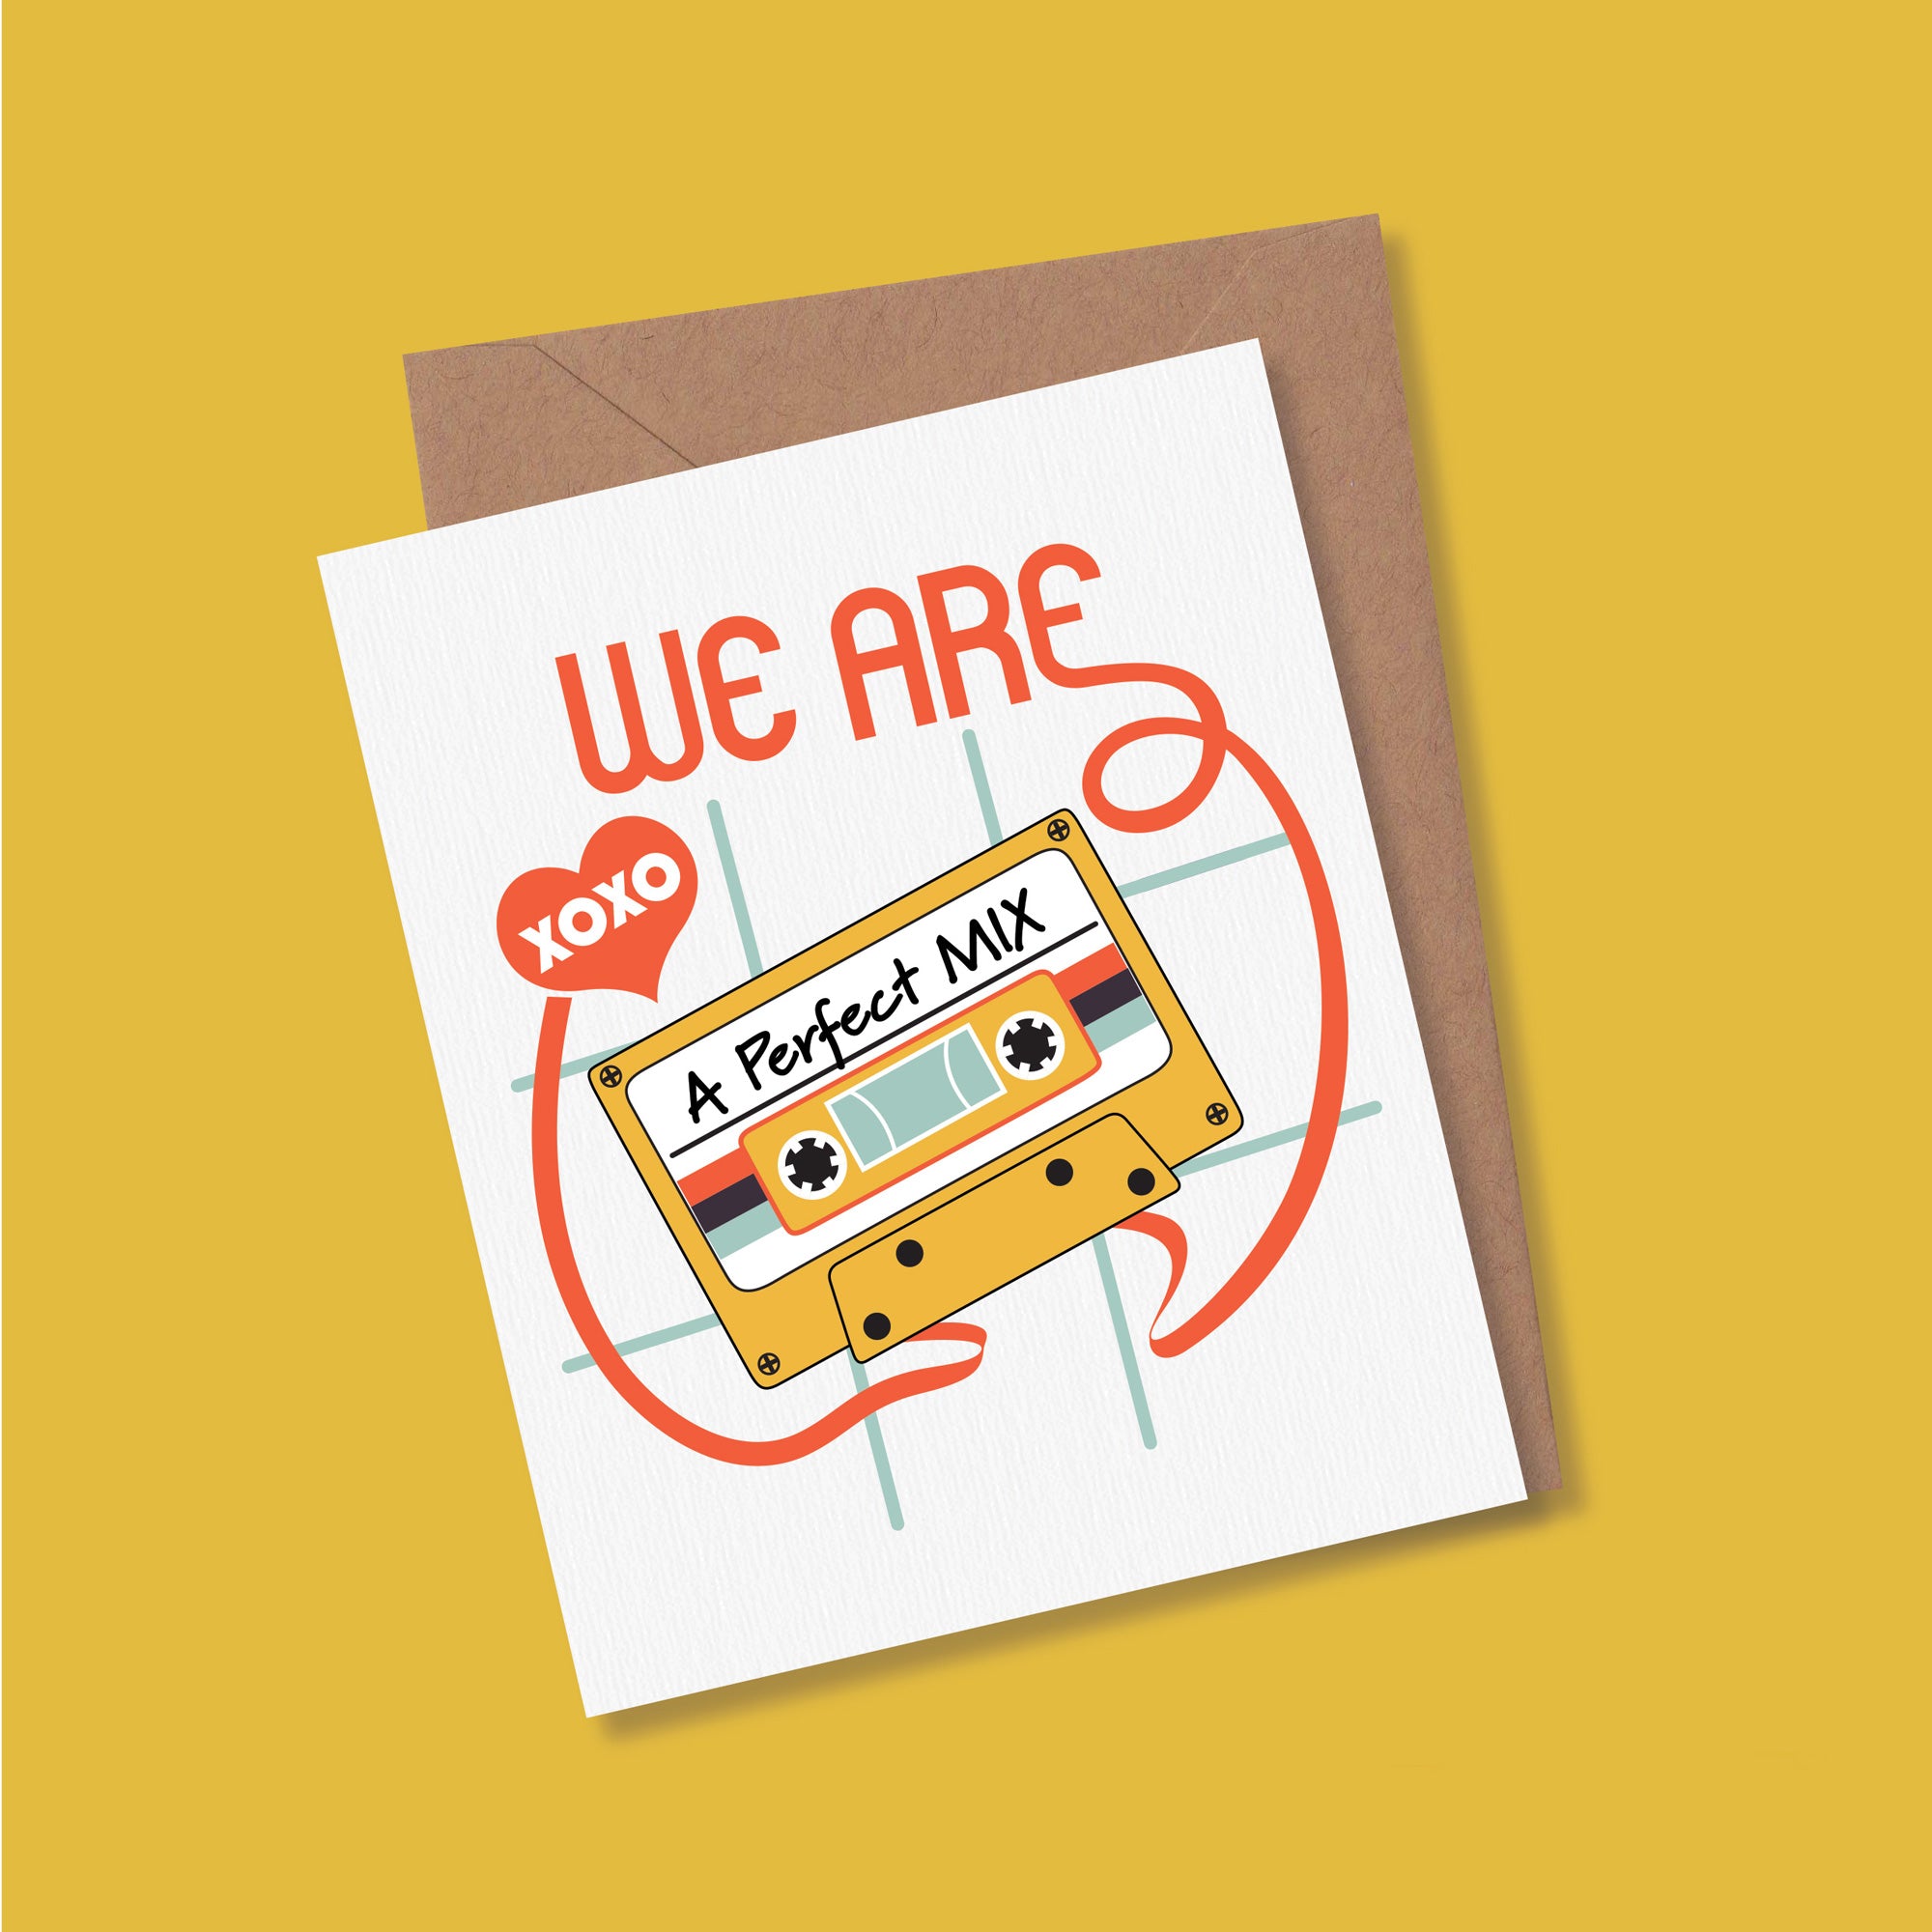 80s love card with cassette tape illustration for anniversary. We are a perfect mix by Gigglemugg